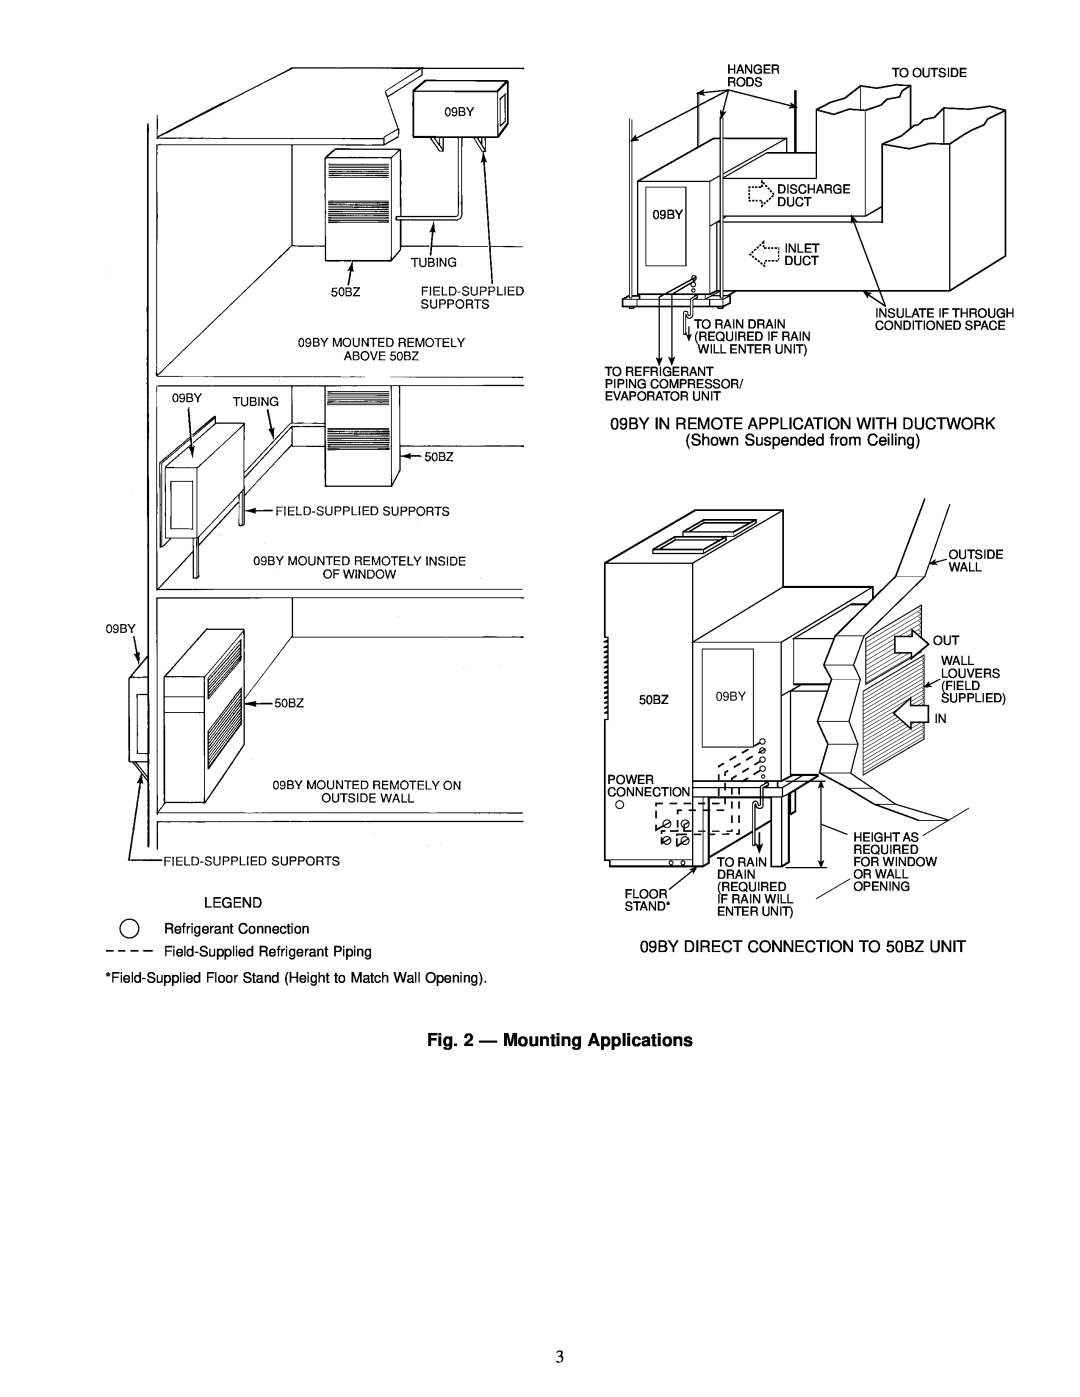 Carrier 09BY006-024 Ð Mounting Applications, 09BY IN REMOTE APPLICATION WITH DUCTWORK Shown Suspended from Ceiling 